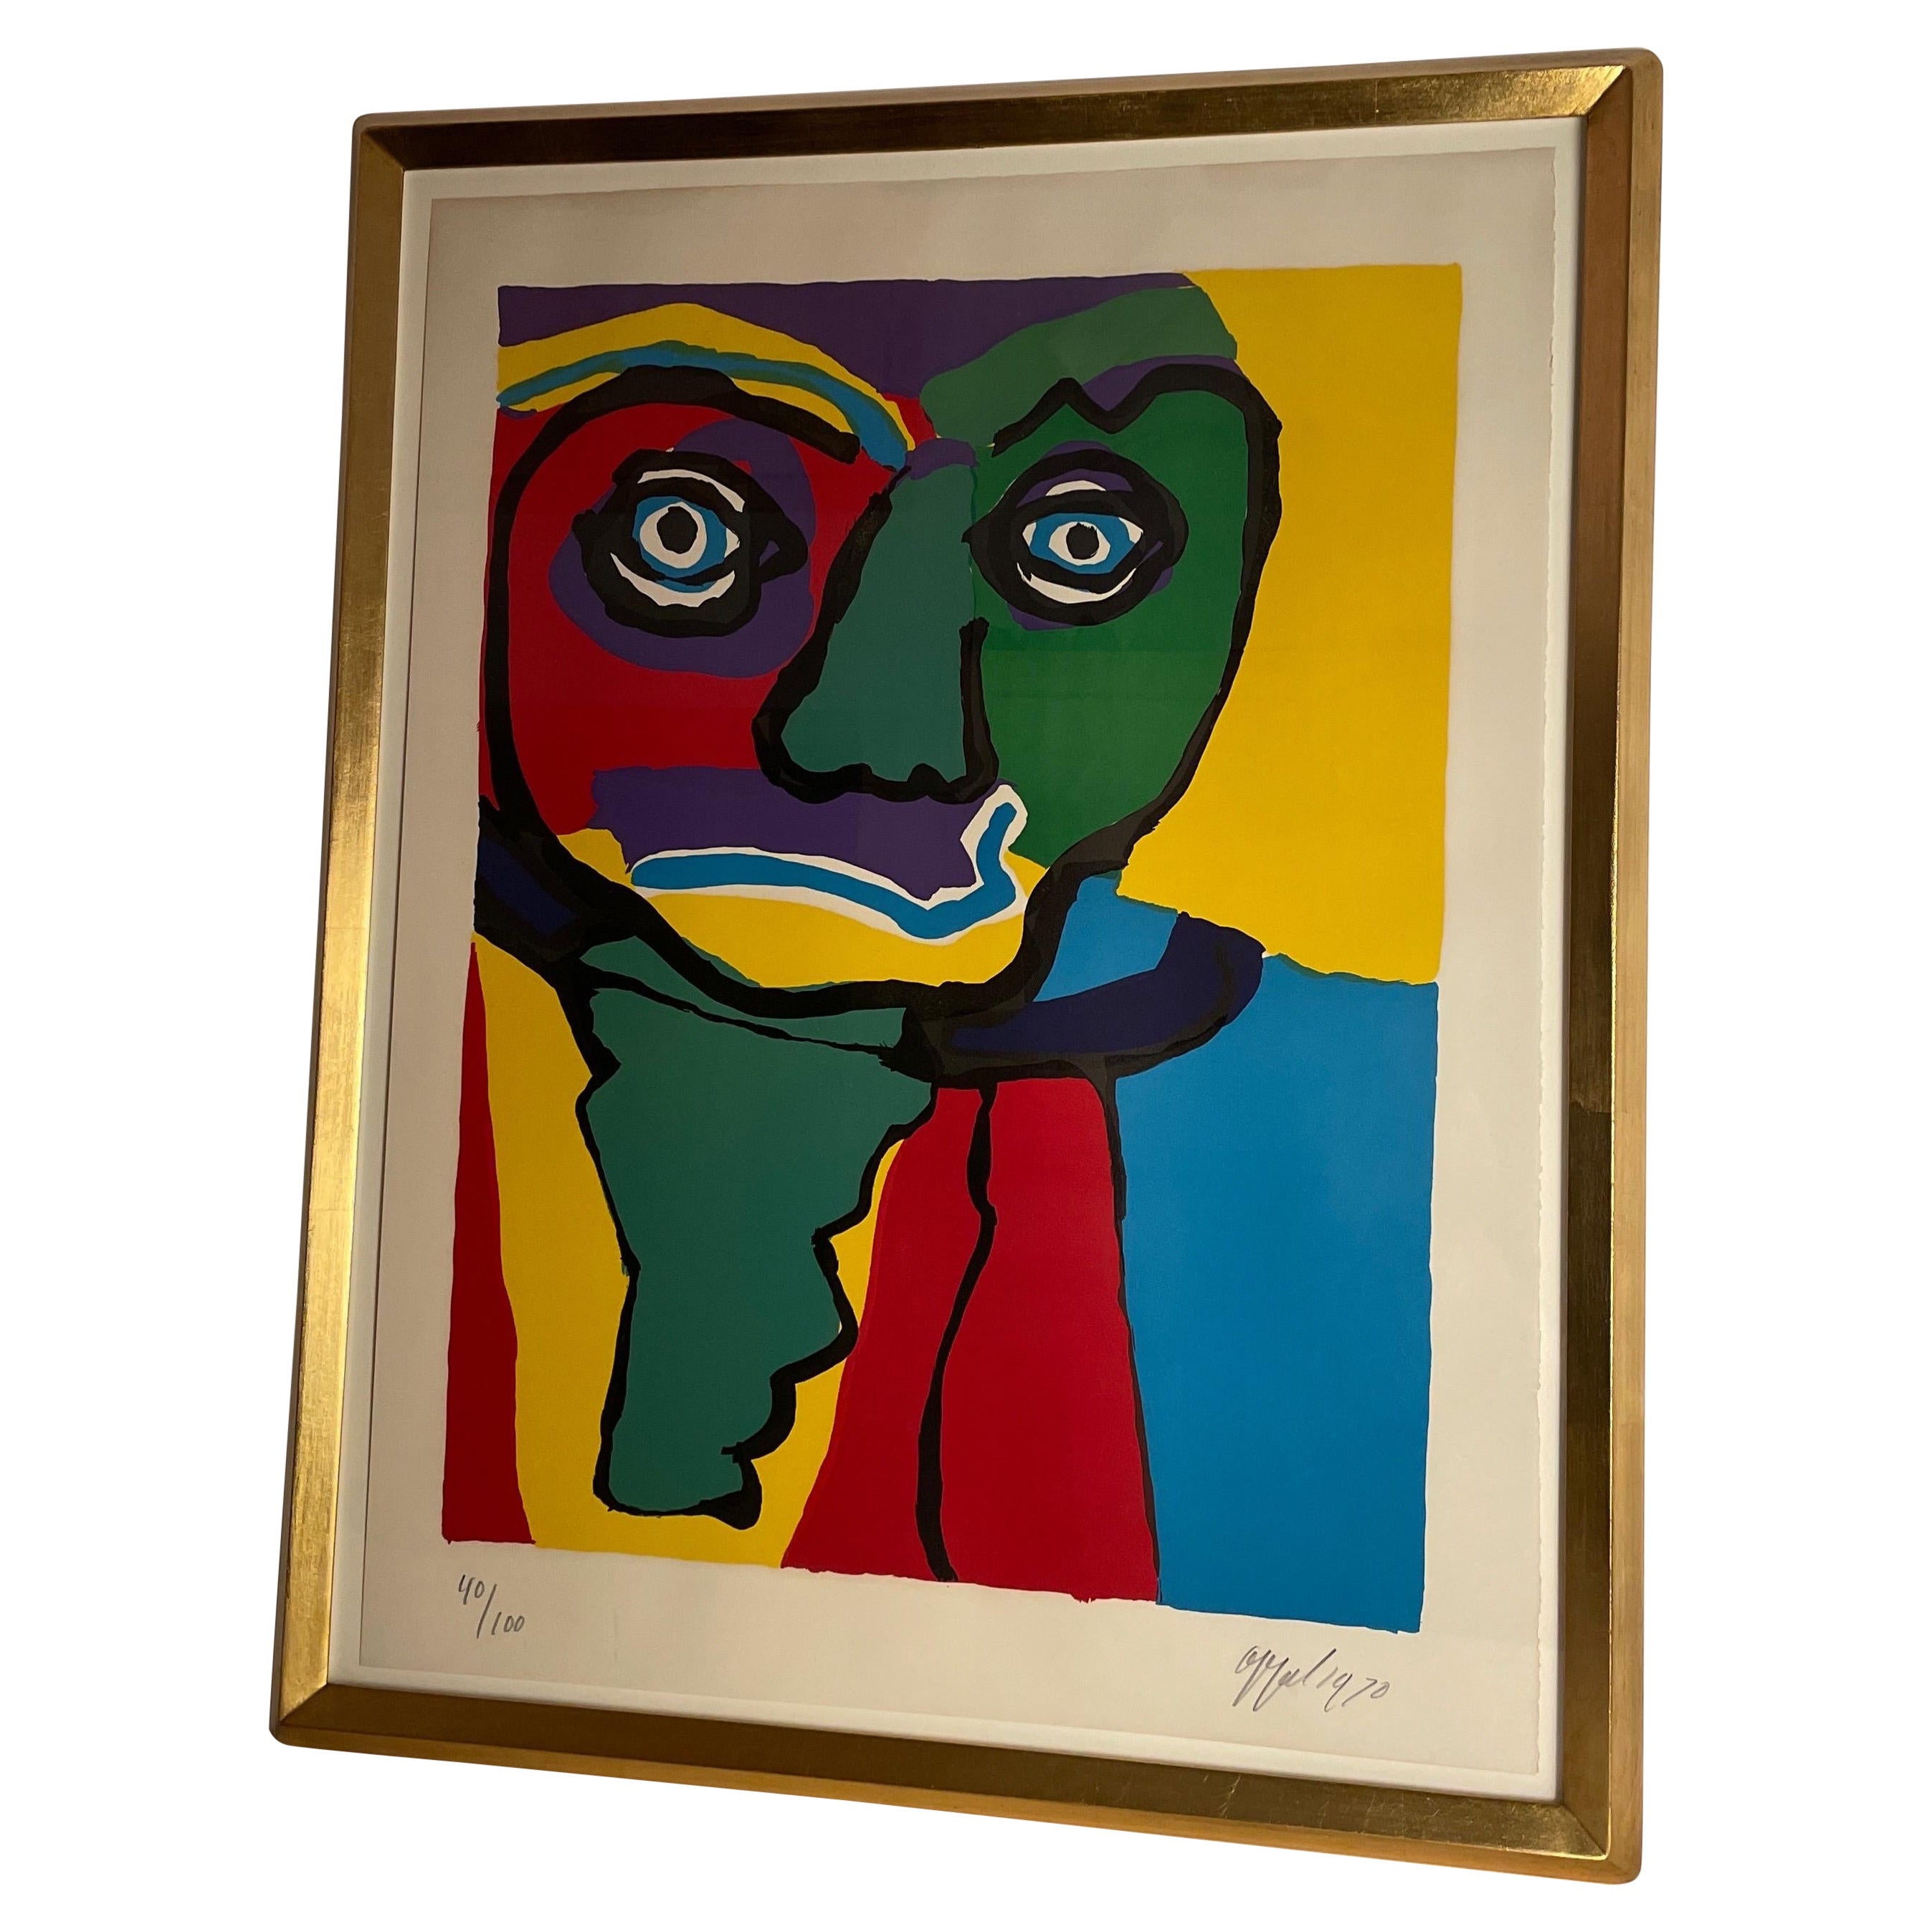 Signed lithograph “personage” by Karelia Appel For Sale